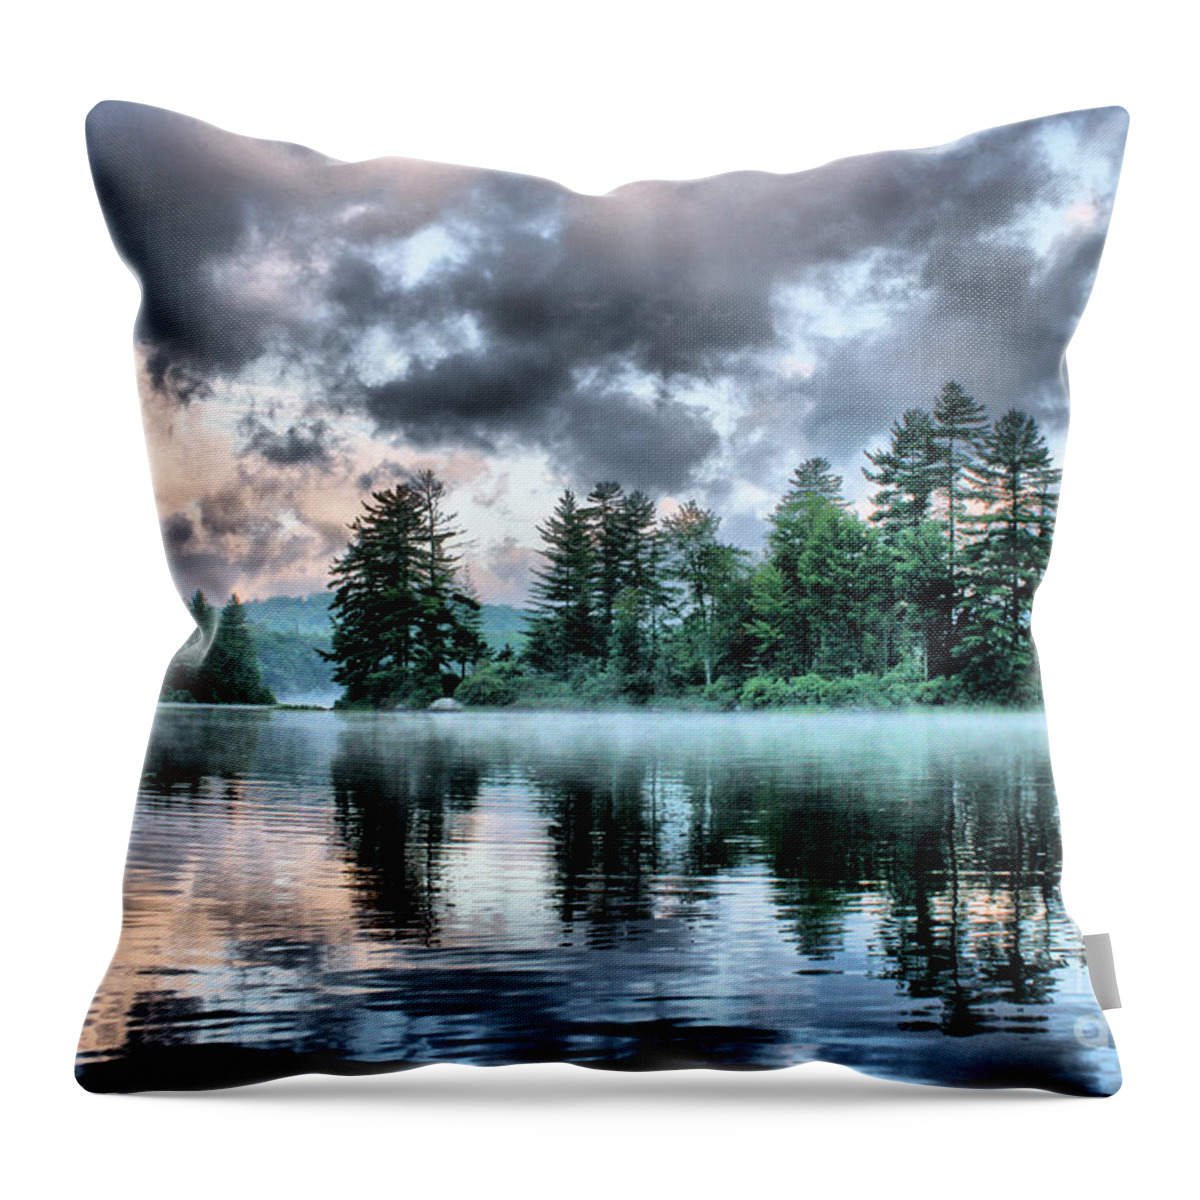 Surreal Throw Pillow featuring the photograph Surreal Adirondack Lake by Stan Reckard